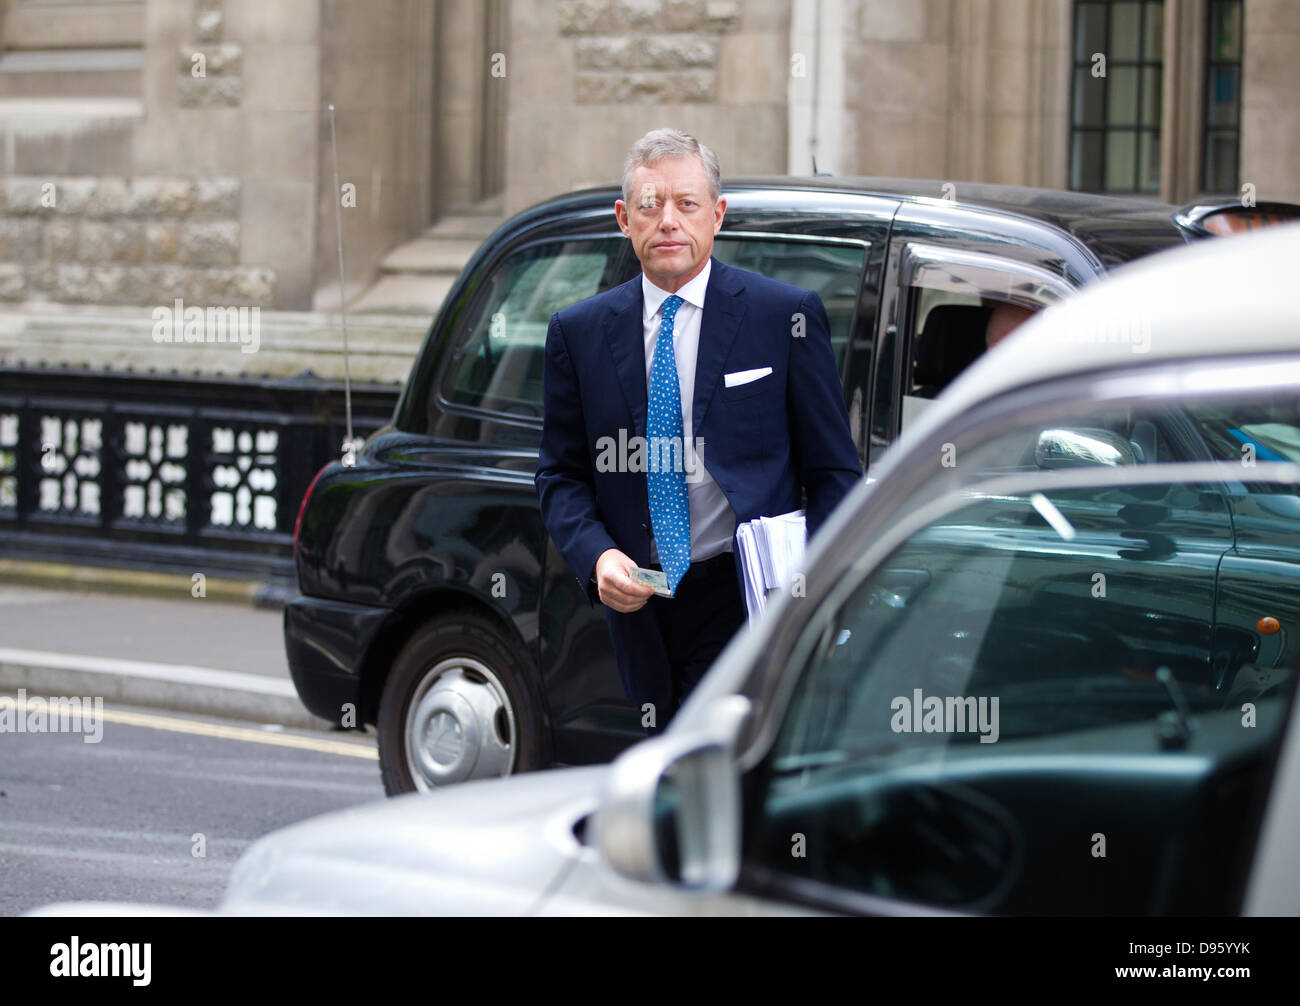 London, UK. 12th June 2013. Alexander Vik, Rolls Building, London, UK Picture shows Alexander Vik,  President, Chairman and Chief Executive Officer at Sebastian Holdings Inc. arriving at the Rolls Building, London where he suing Deutsche Bank over $8 Billion fund losses dating back to 2008. Stock Photo